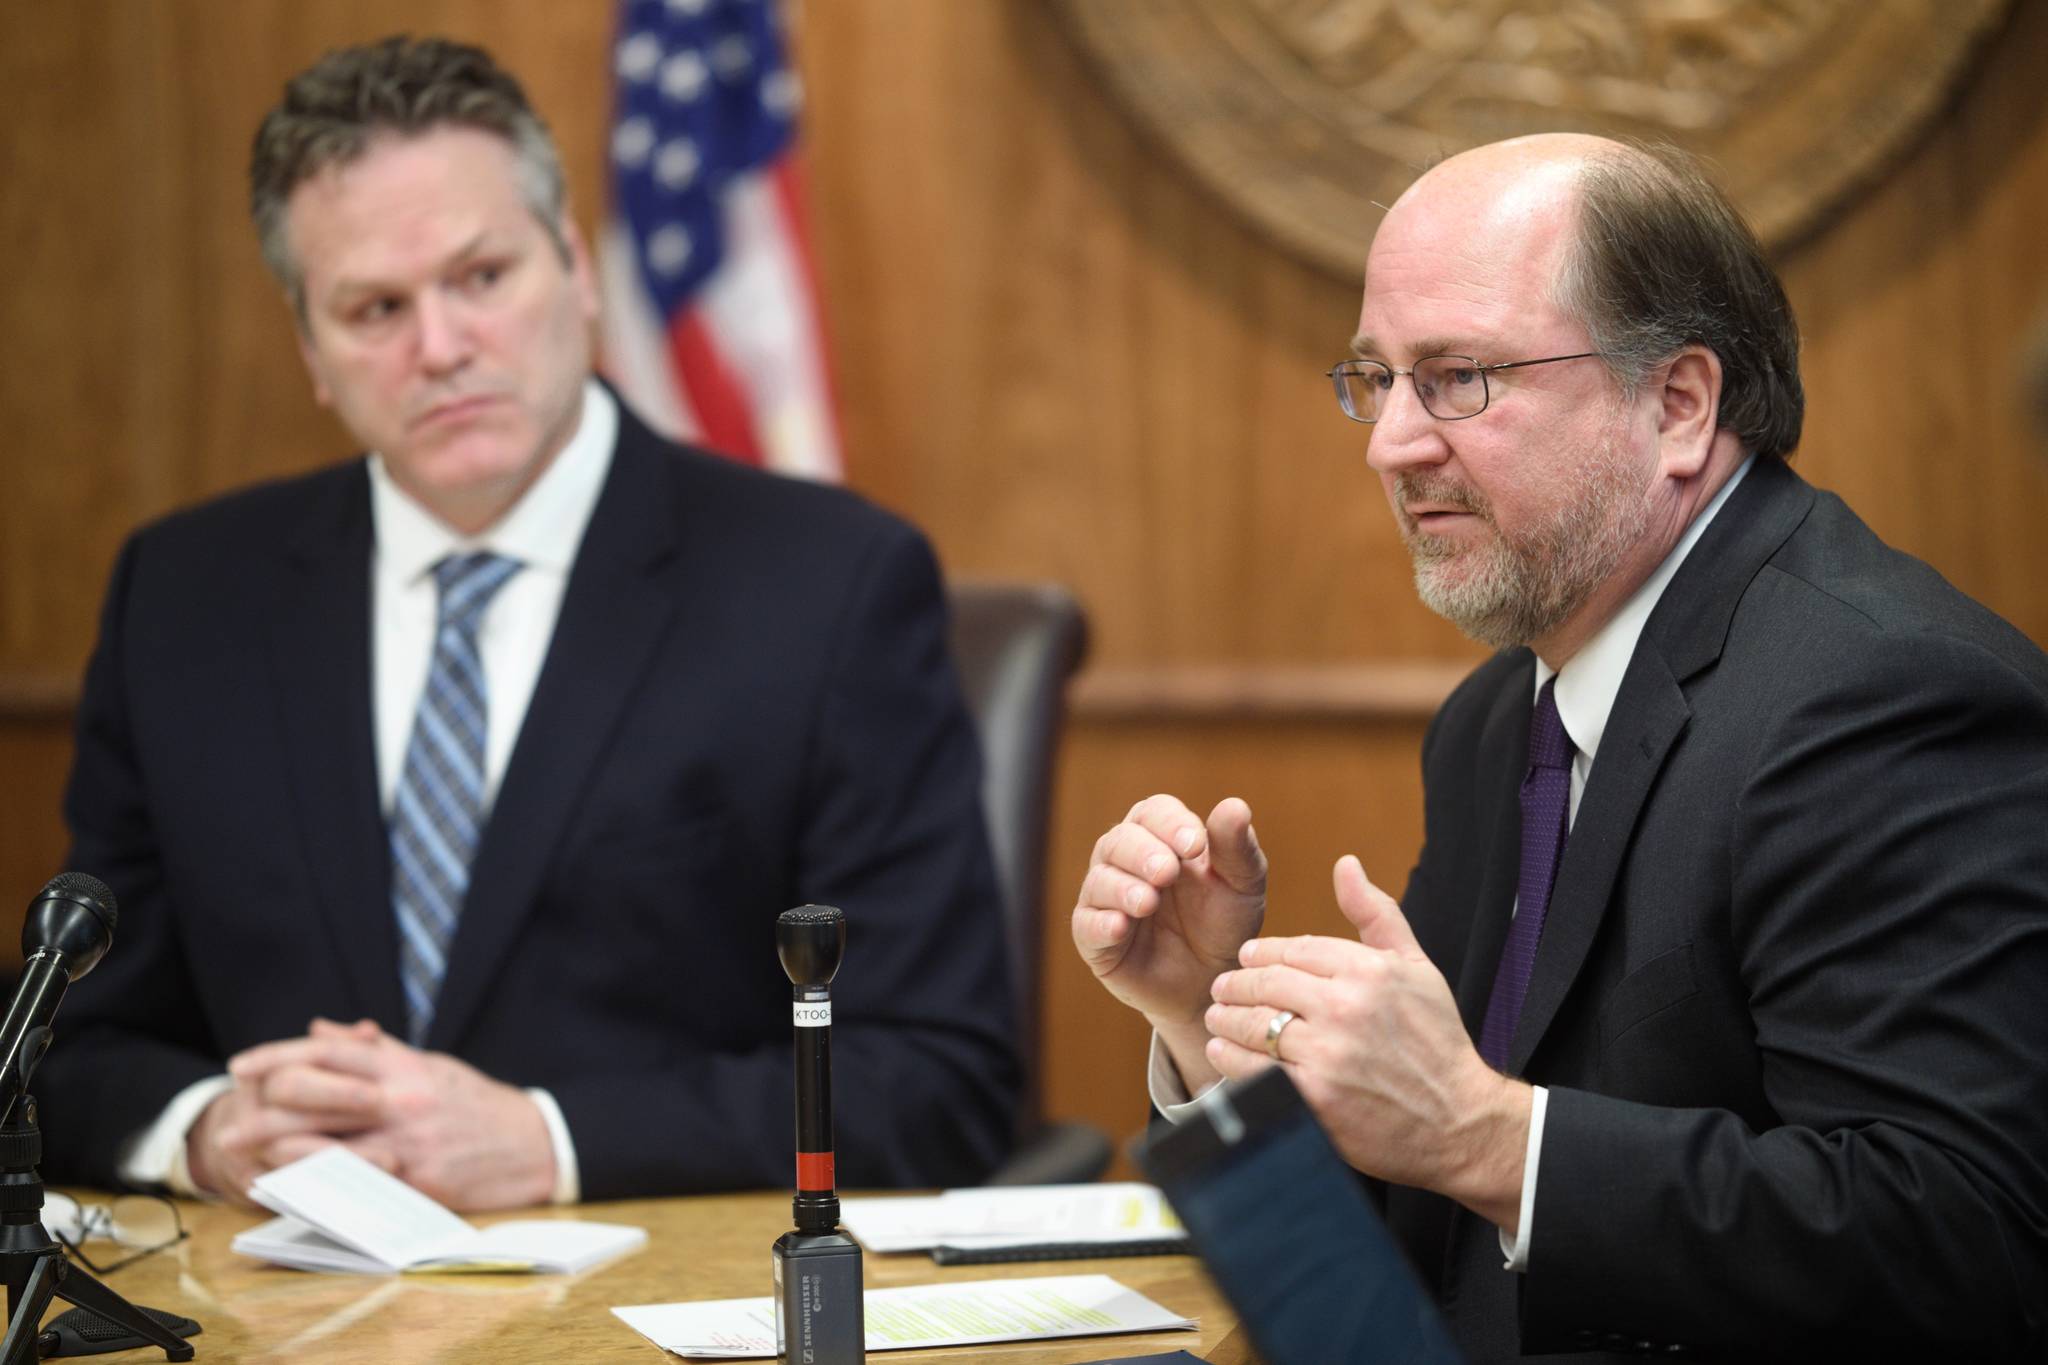 Gov. Mike Dunleavy, left, listens as Attorney General Kevin Clarkson describes three constitutional amendments that would be a foundation of his administration’s fiscal plan during a press conference at the Capitol on Wednesday, Jan. 30, 2019. (Michael Penn | Juneau Empire)